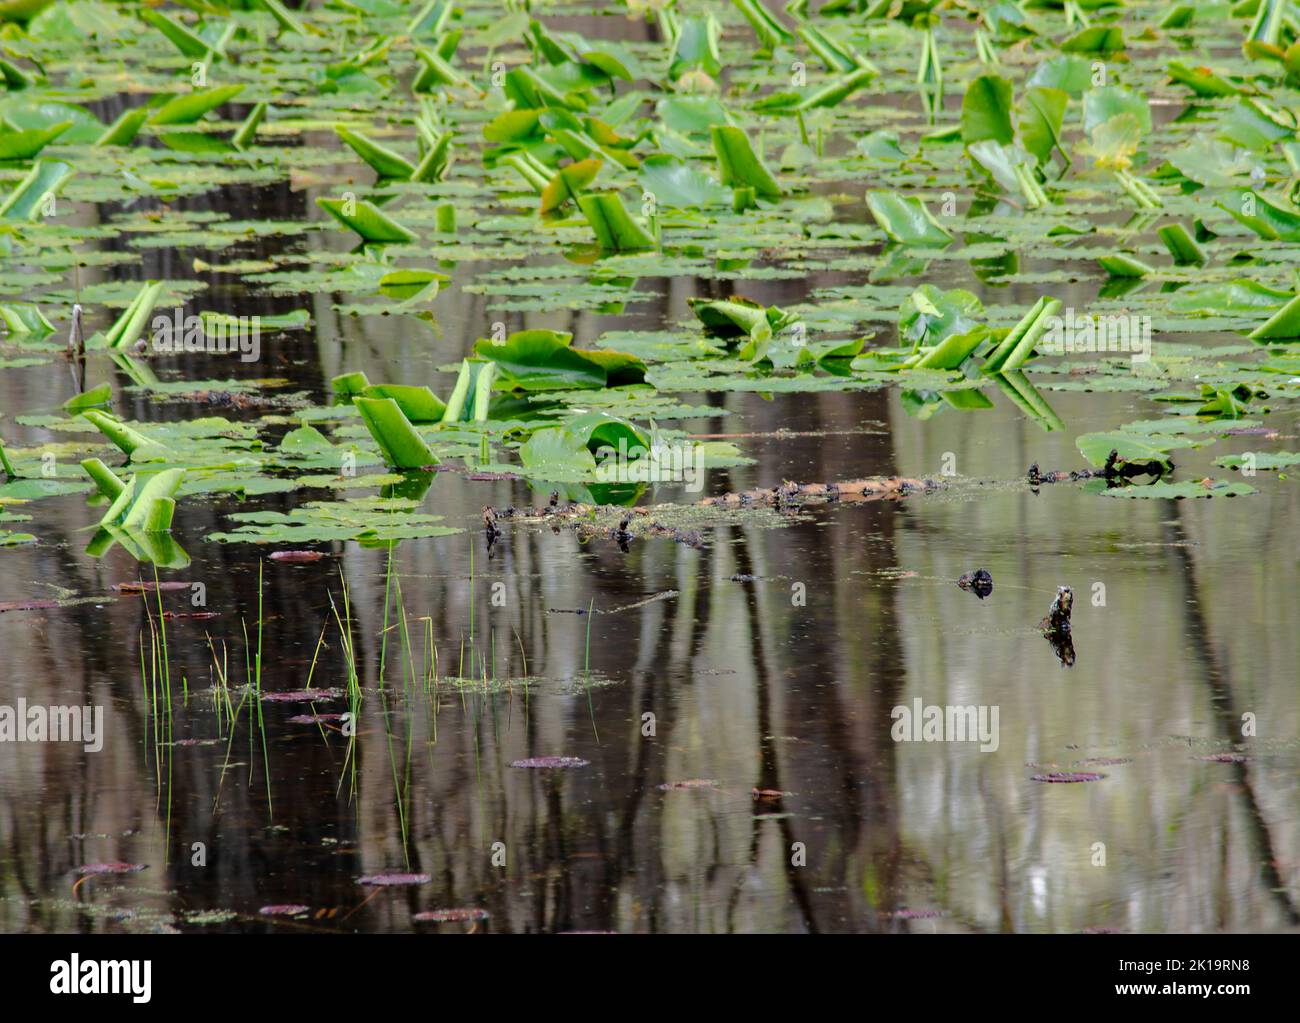 Spring water shields mix with reflections of the nearby forest, Kent Lake, Kensington Metropark, Oakland County, Michigan Stock Photo